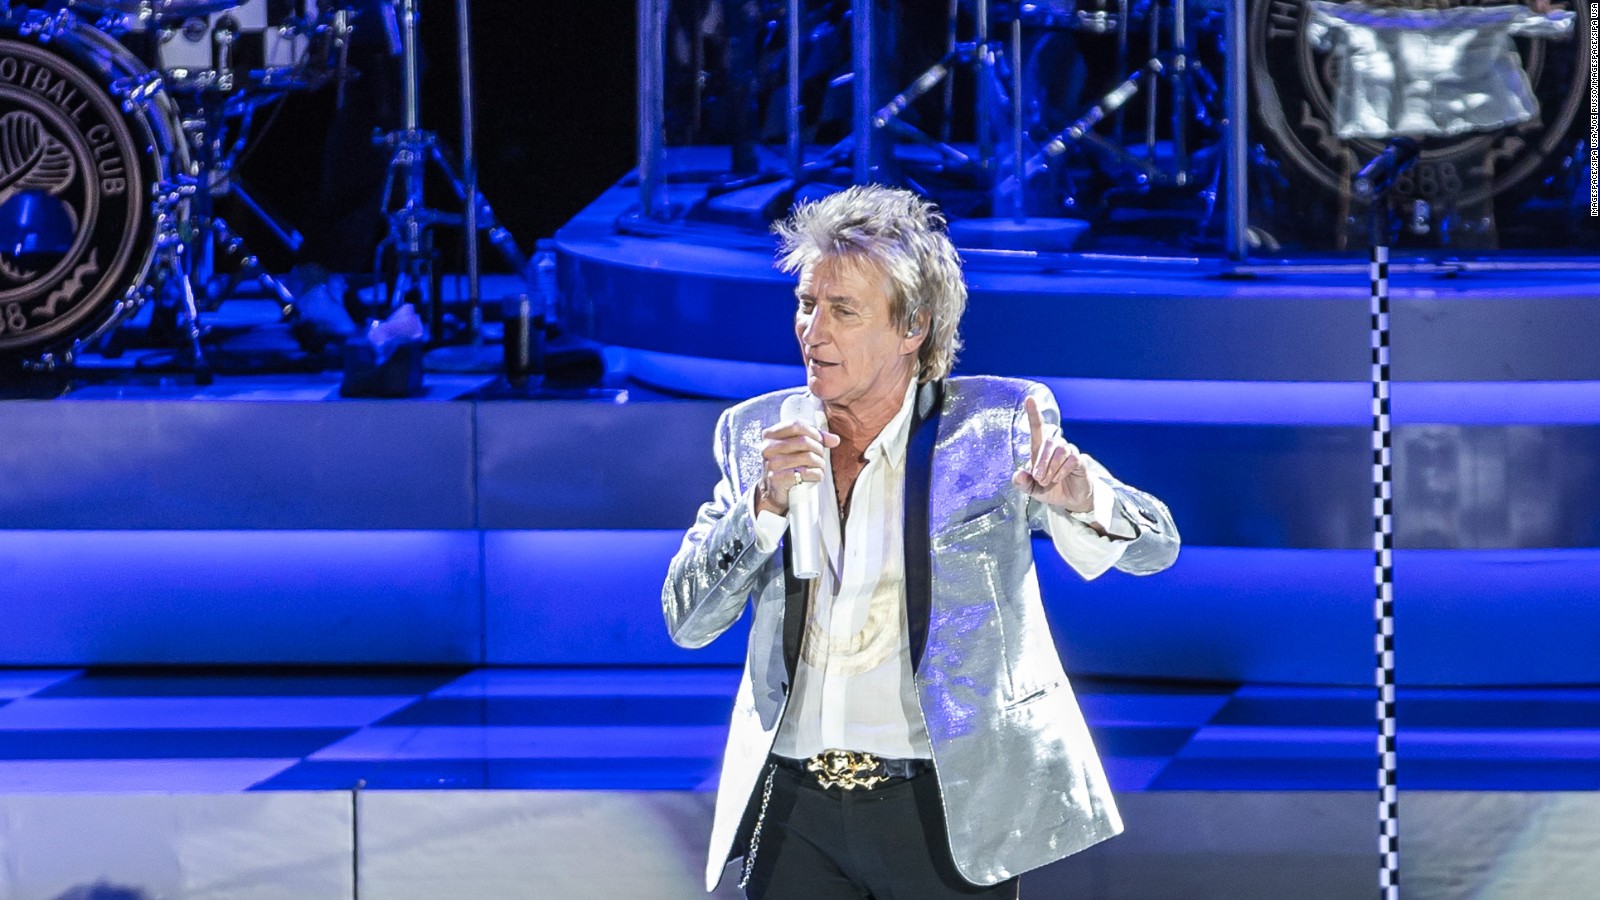 Singer Sir Rod Stewart and his son plead guilty to simple battery - CNN